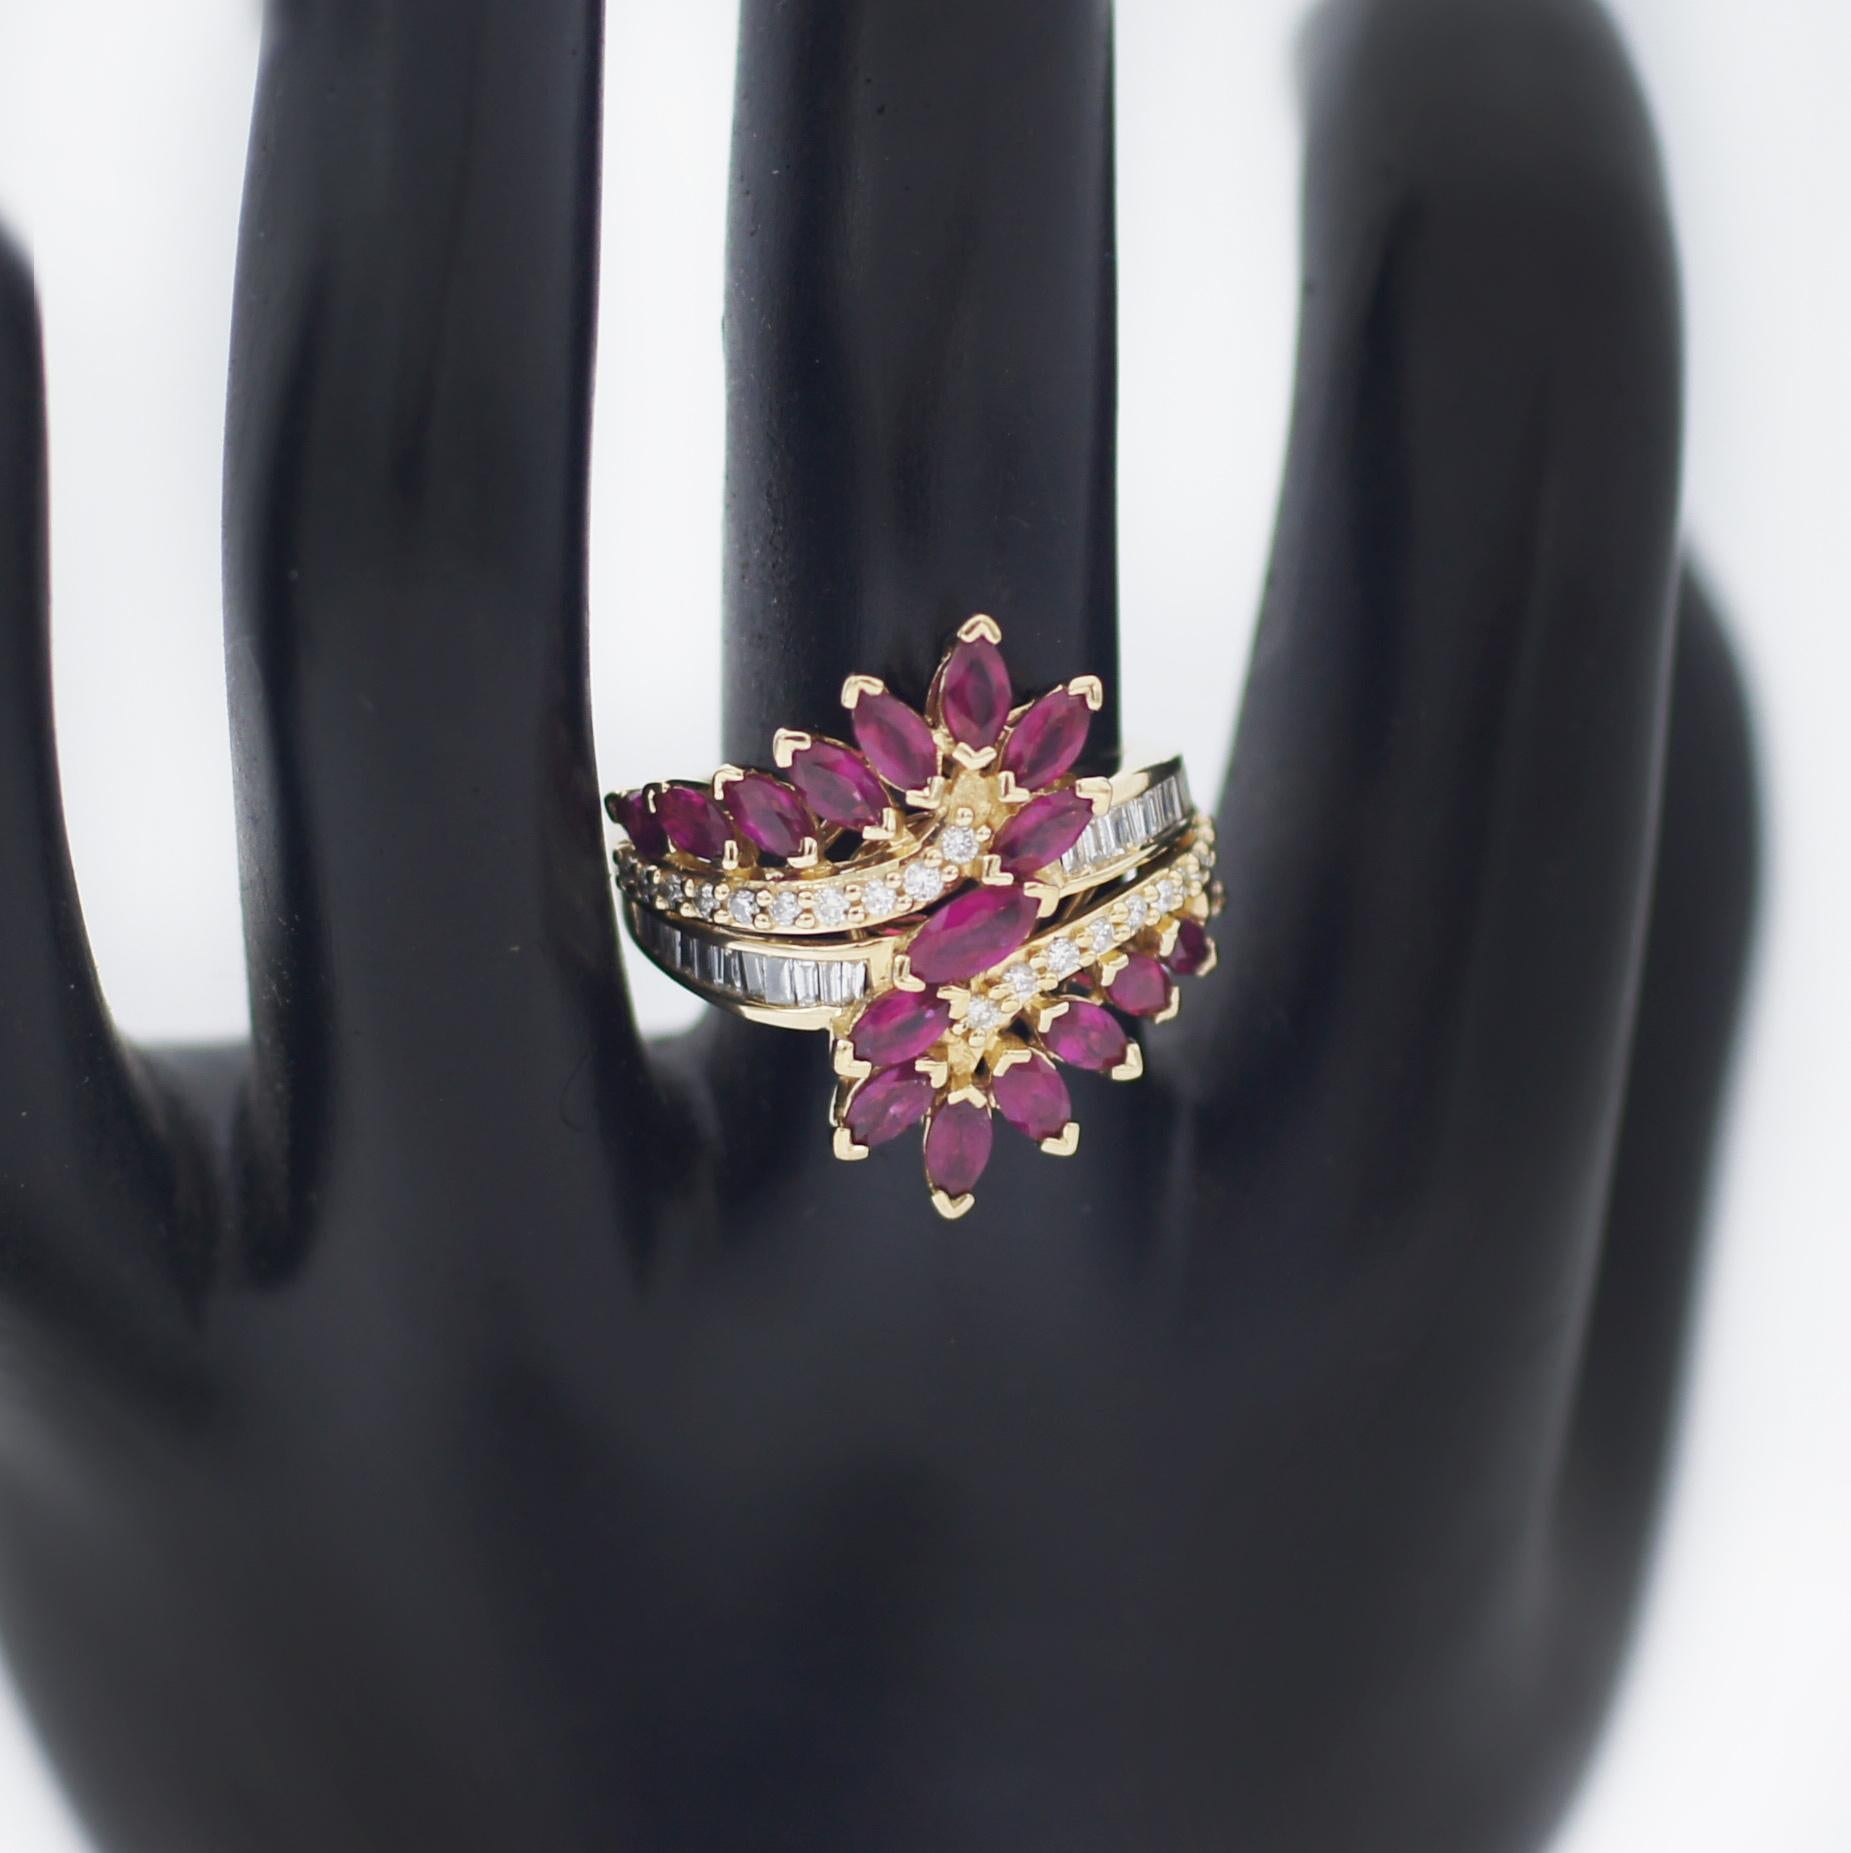 EFFY
This stunning ring is featured on a polished 14K Yellow Gold setting
Product Details:
41 Diamonds, 17 Rubies
Approx. 1/2 ct. t.w. Diamonds and 3.2 ct. t.w. Natural Rubies
Clarity rating: H, I
Clarity rating: I1-I2
Polished finish
Prong